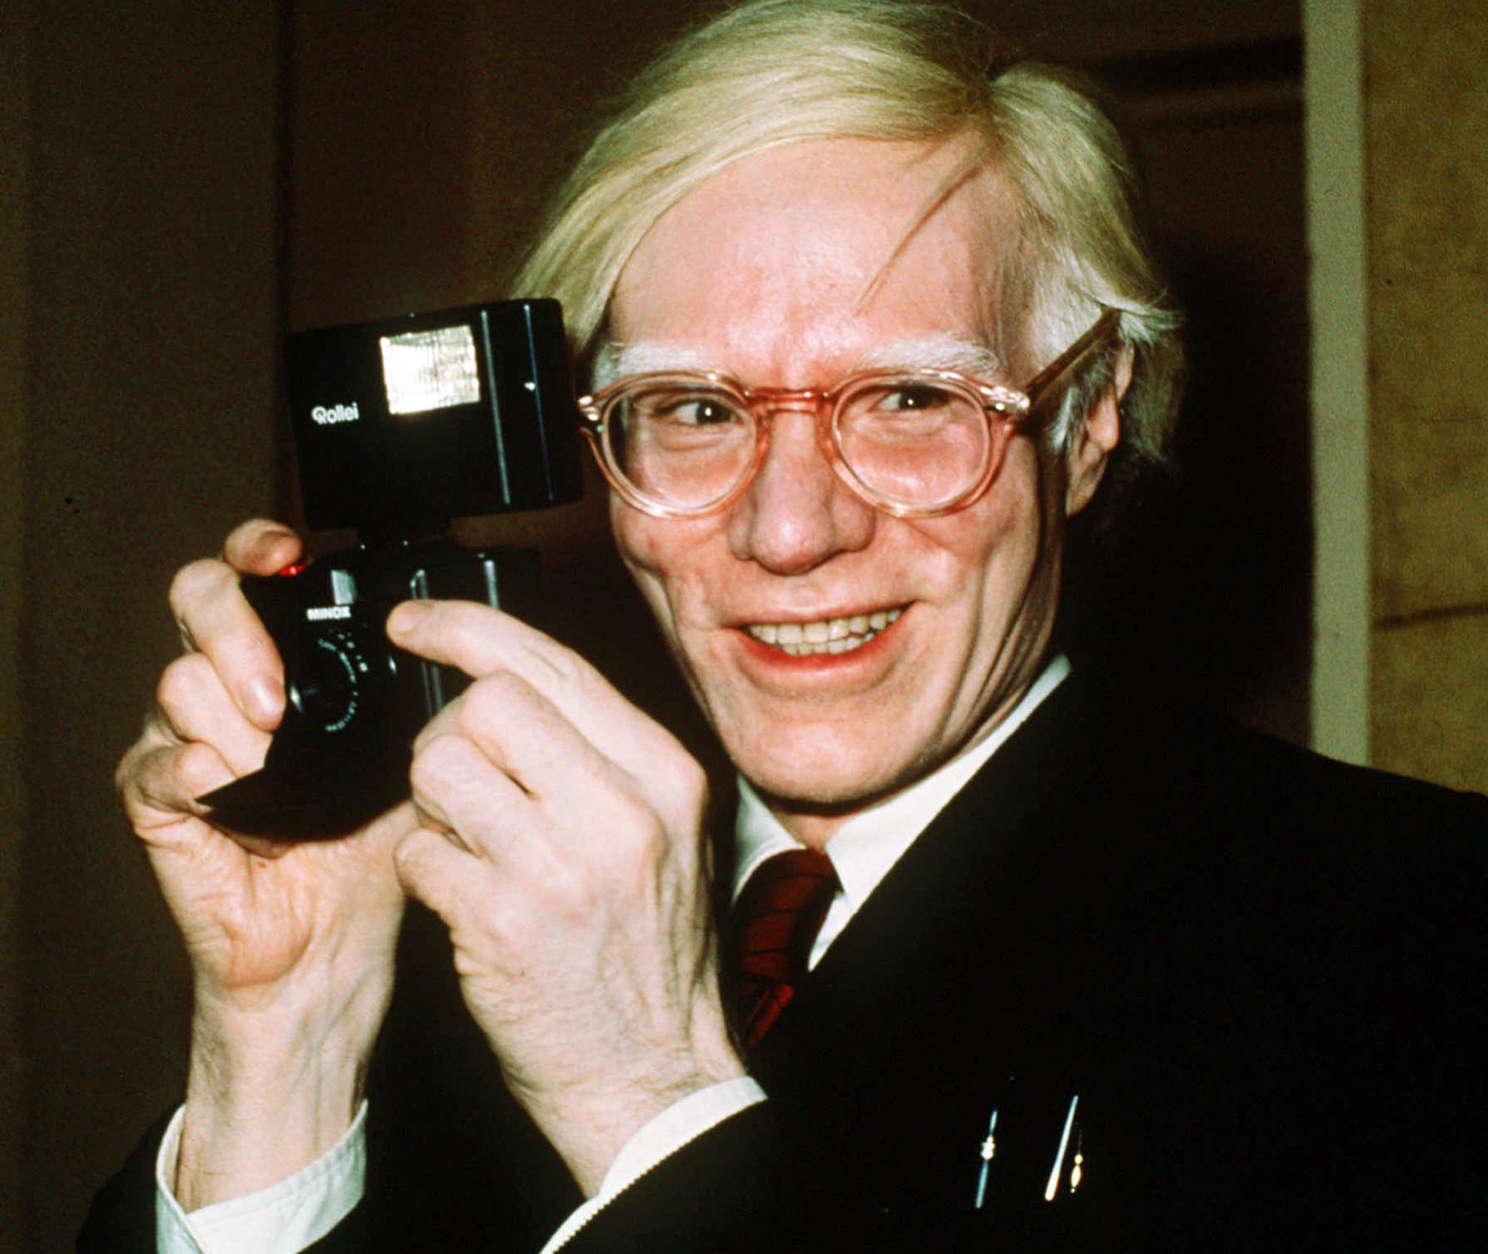 FILE - In this 1976 file photo, pop artist Andy Warhol smiles in New York. In the late 1970s, pop artist Andy Warhol and writer Truman Capote recorded dozens of hours of intimate conversations they planned to use as the basis for a Broadway play however, the two icons moved on to other projects, the tapes were forgotten and both men died. Director Rob Roth tracked down the tapes and adapted them for the play premiering Sunday, Sept. 10, 2017, in Cambridge, Mass. (AP Photo/Richard Drew, File)